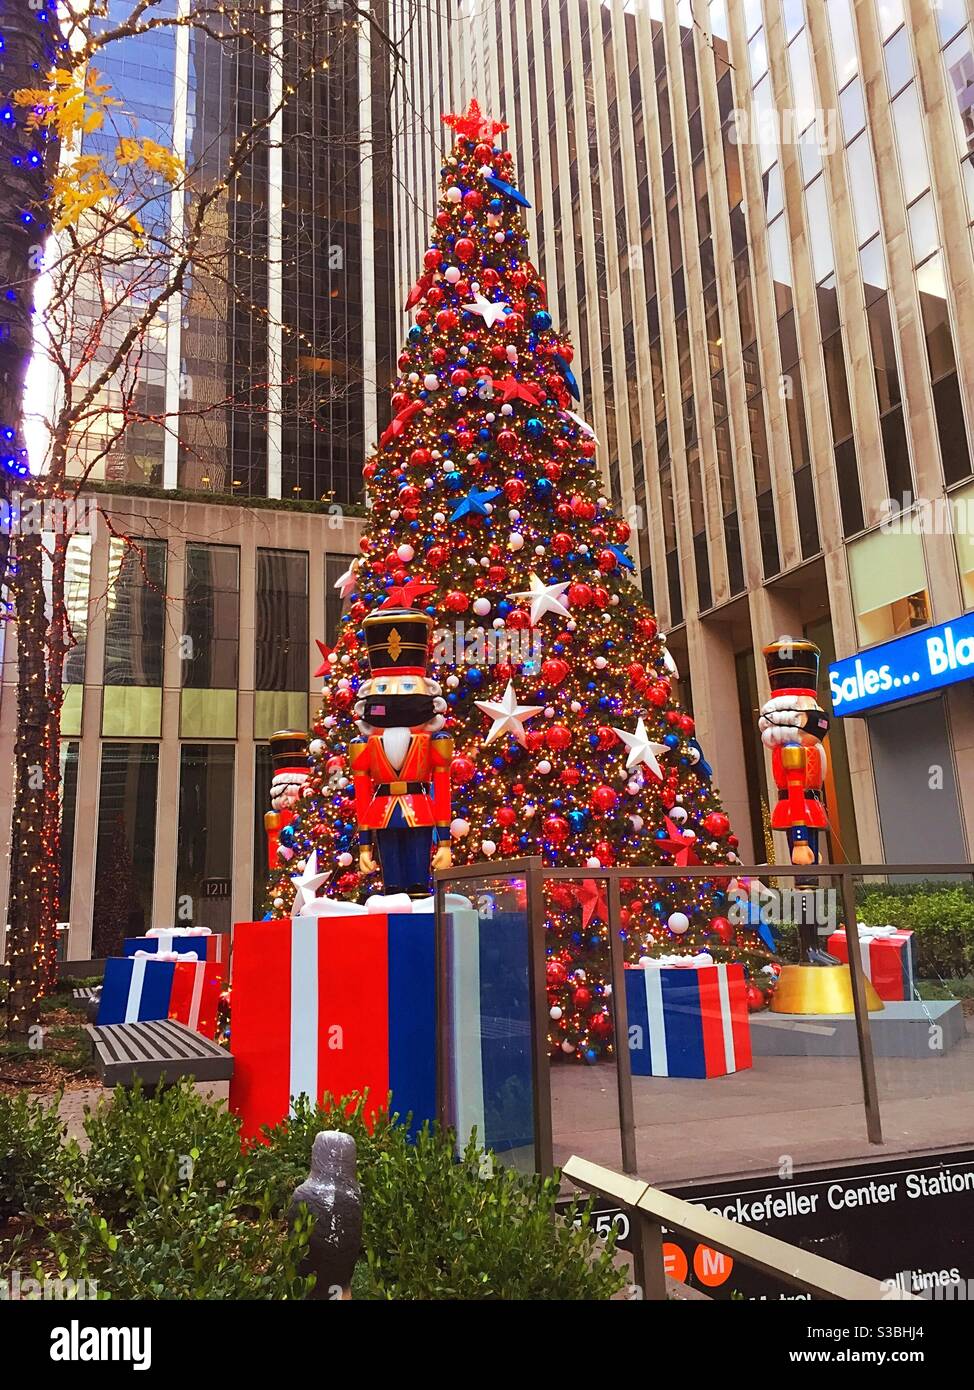 Christmas trees put on display in U.S. cities draw mockery and comparisons  to 2020